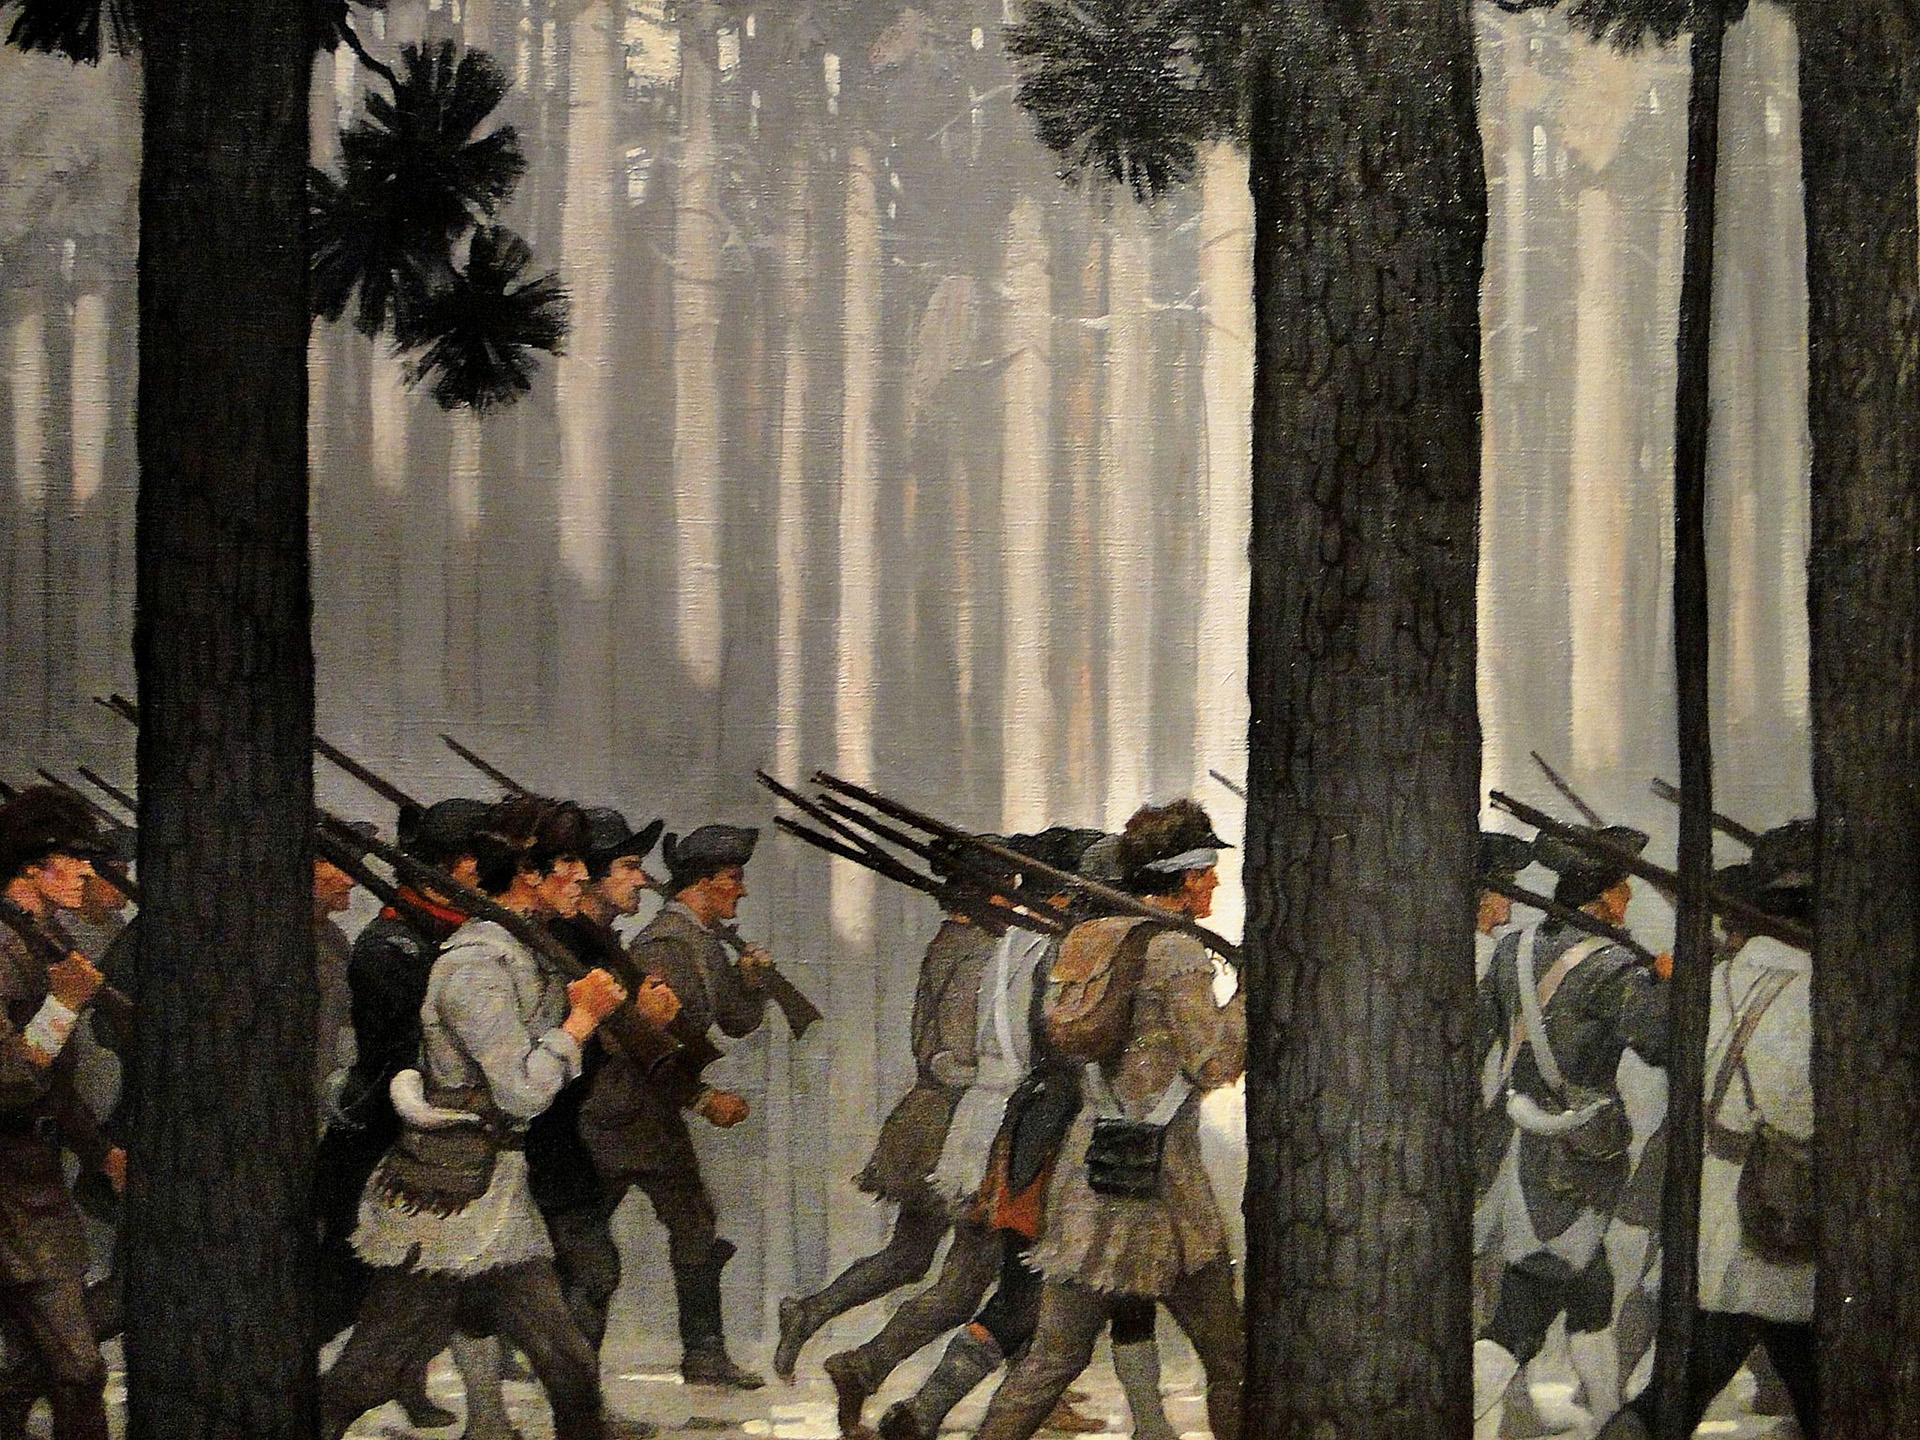 The Americans encountered seemingly endless stands of birch and pine in the Maine Wilderness. All the while, Arnold sought to have them set aside regional rivalries and join common cause against the oppressive British.